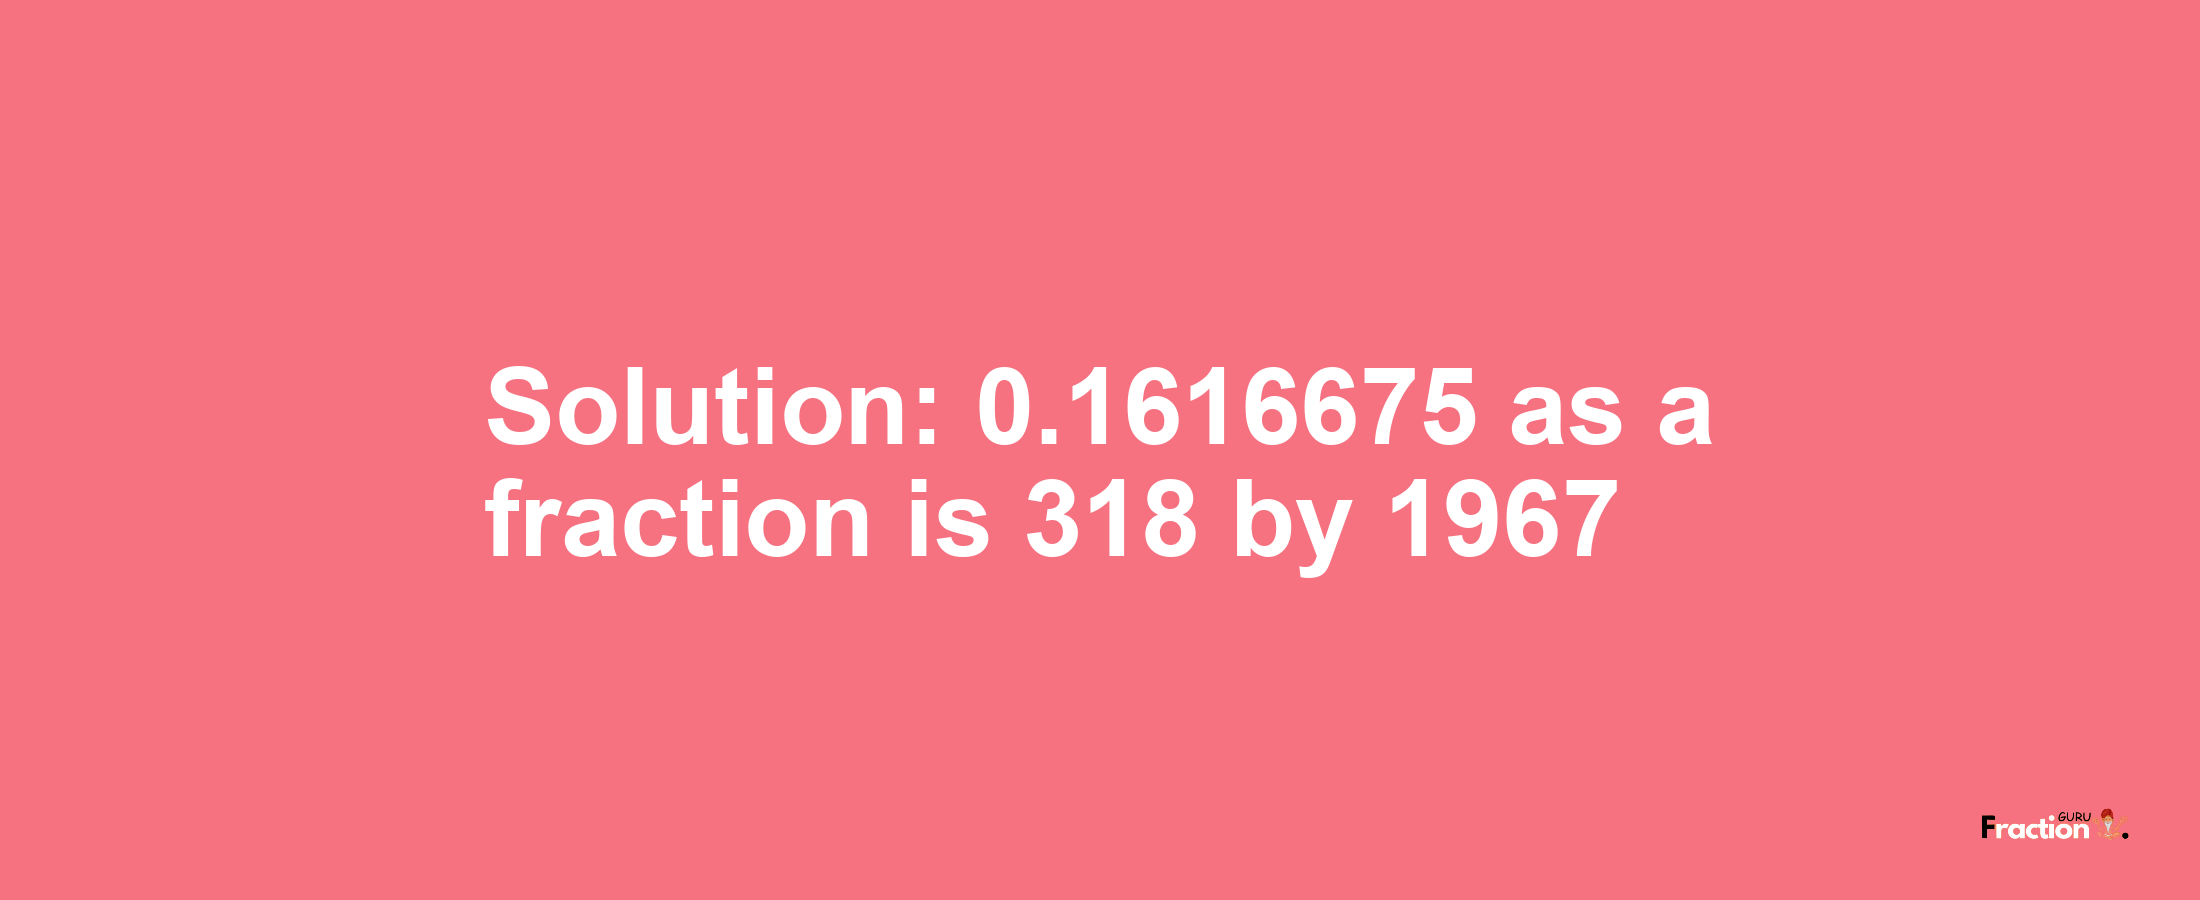 Solution:0.1616675 as a fraction is 318/1967